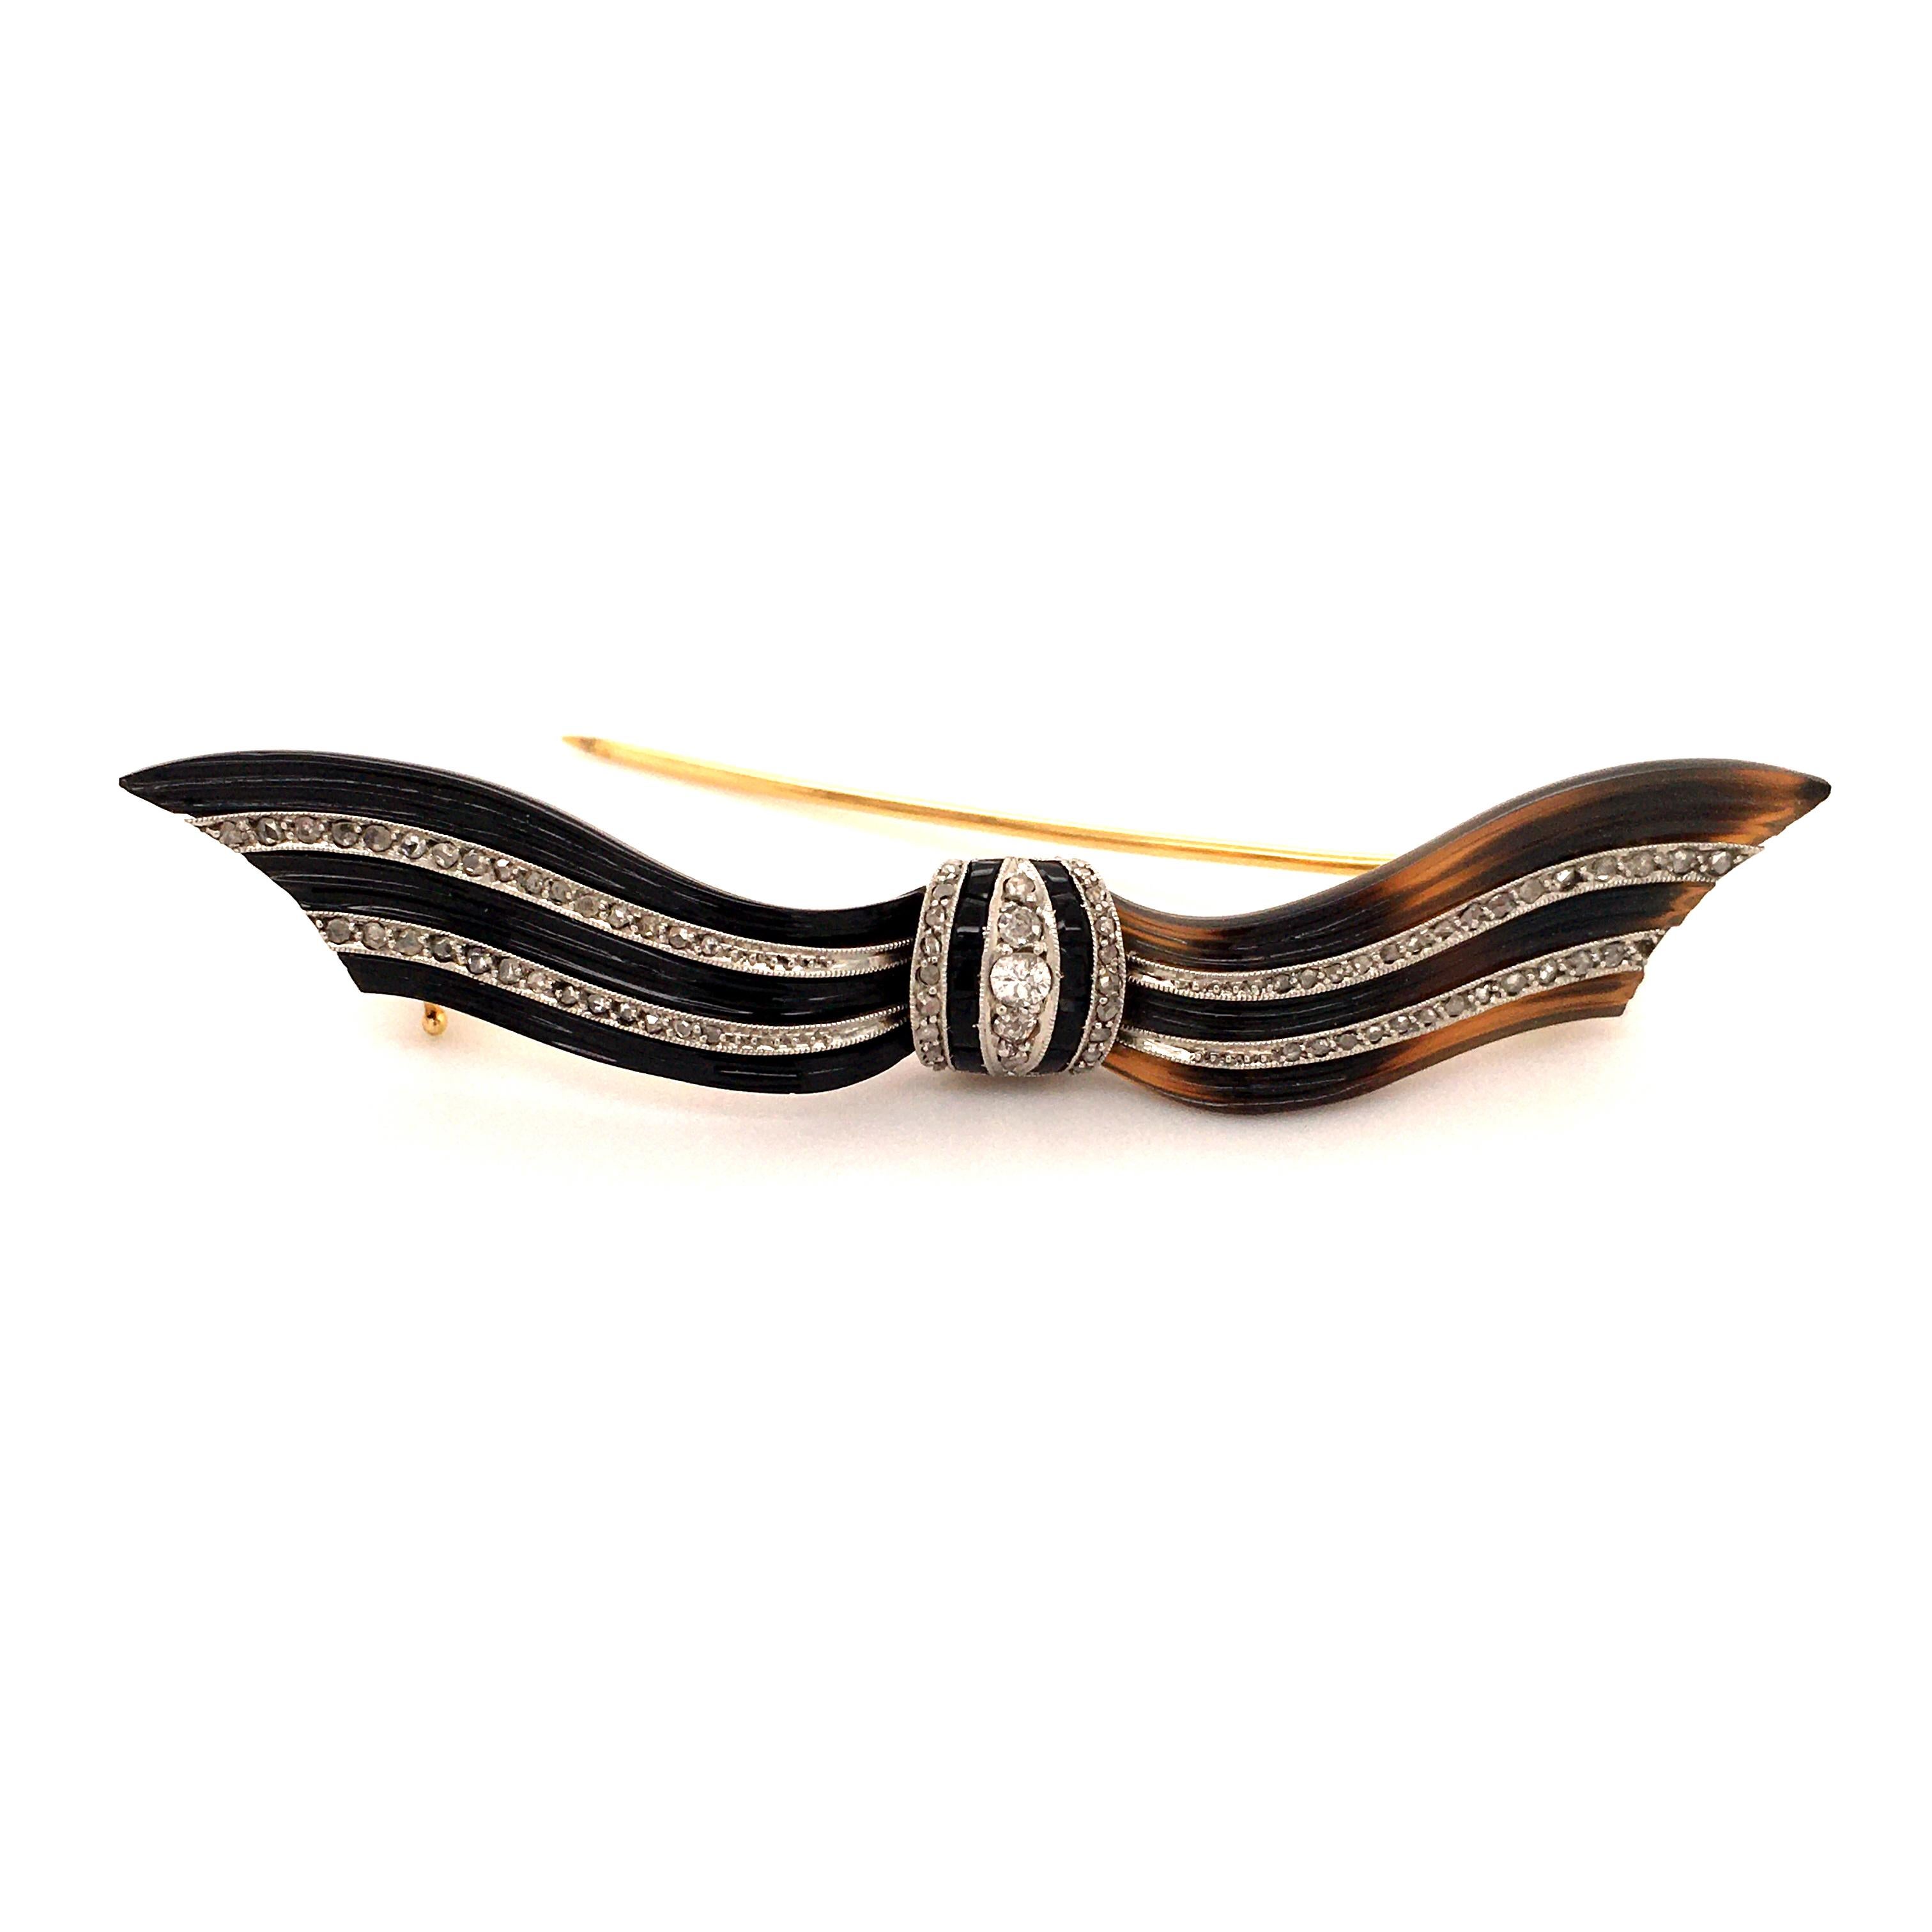 This delicate bow brooch is sculpted from tortoise shell, accented with old and rose cut diamonds and black chalcedony. Millegrain setting in platinum. Brooch fittings in 18 karat yellow gold. Very lovely item. 

Length: 6.5 cm / 2.56 Inches
Assay